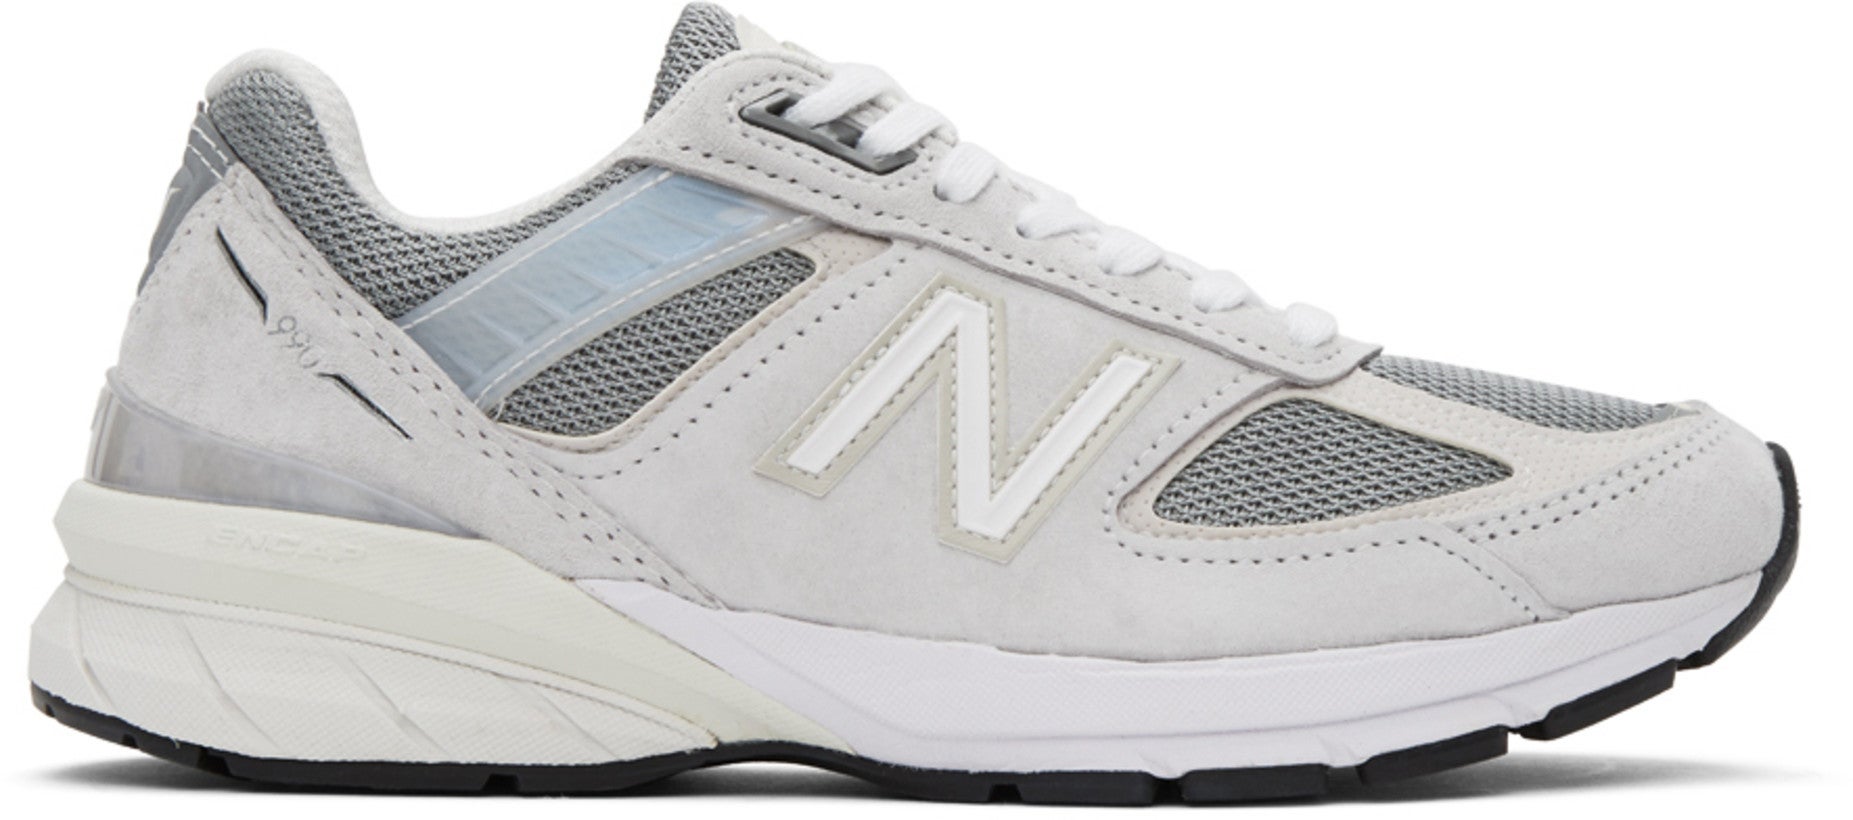 New Balance + Off-White Made In US 990v5 Sneakers